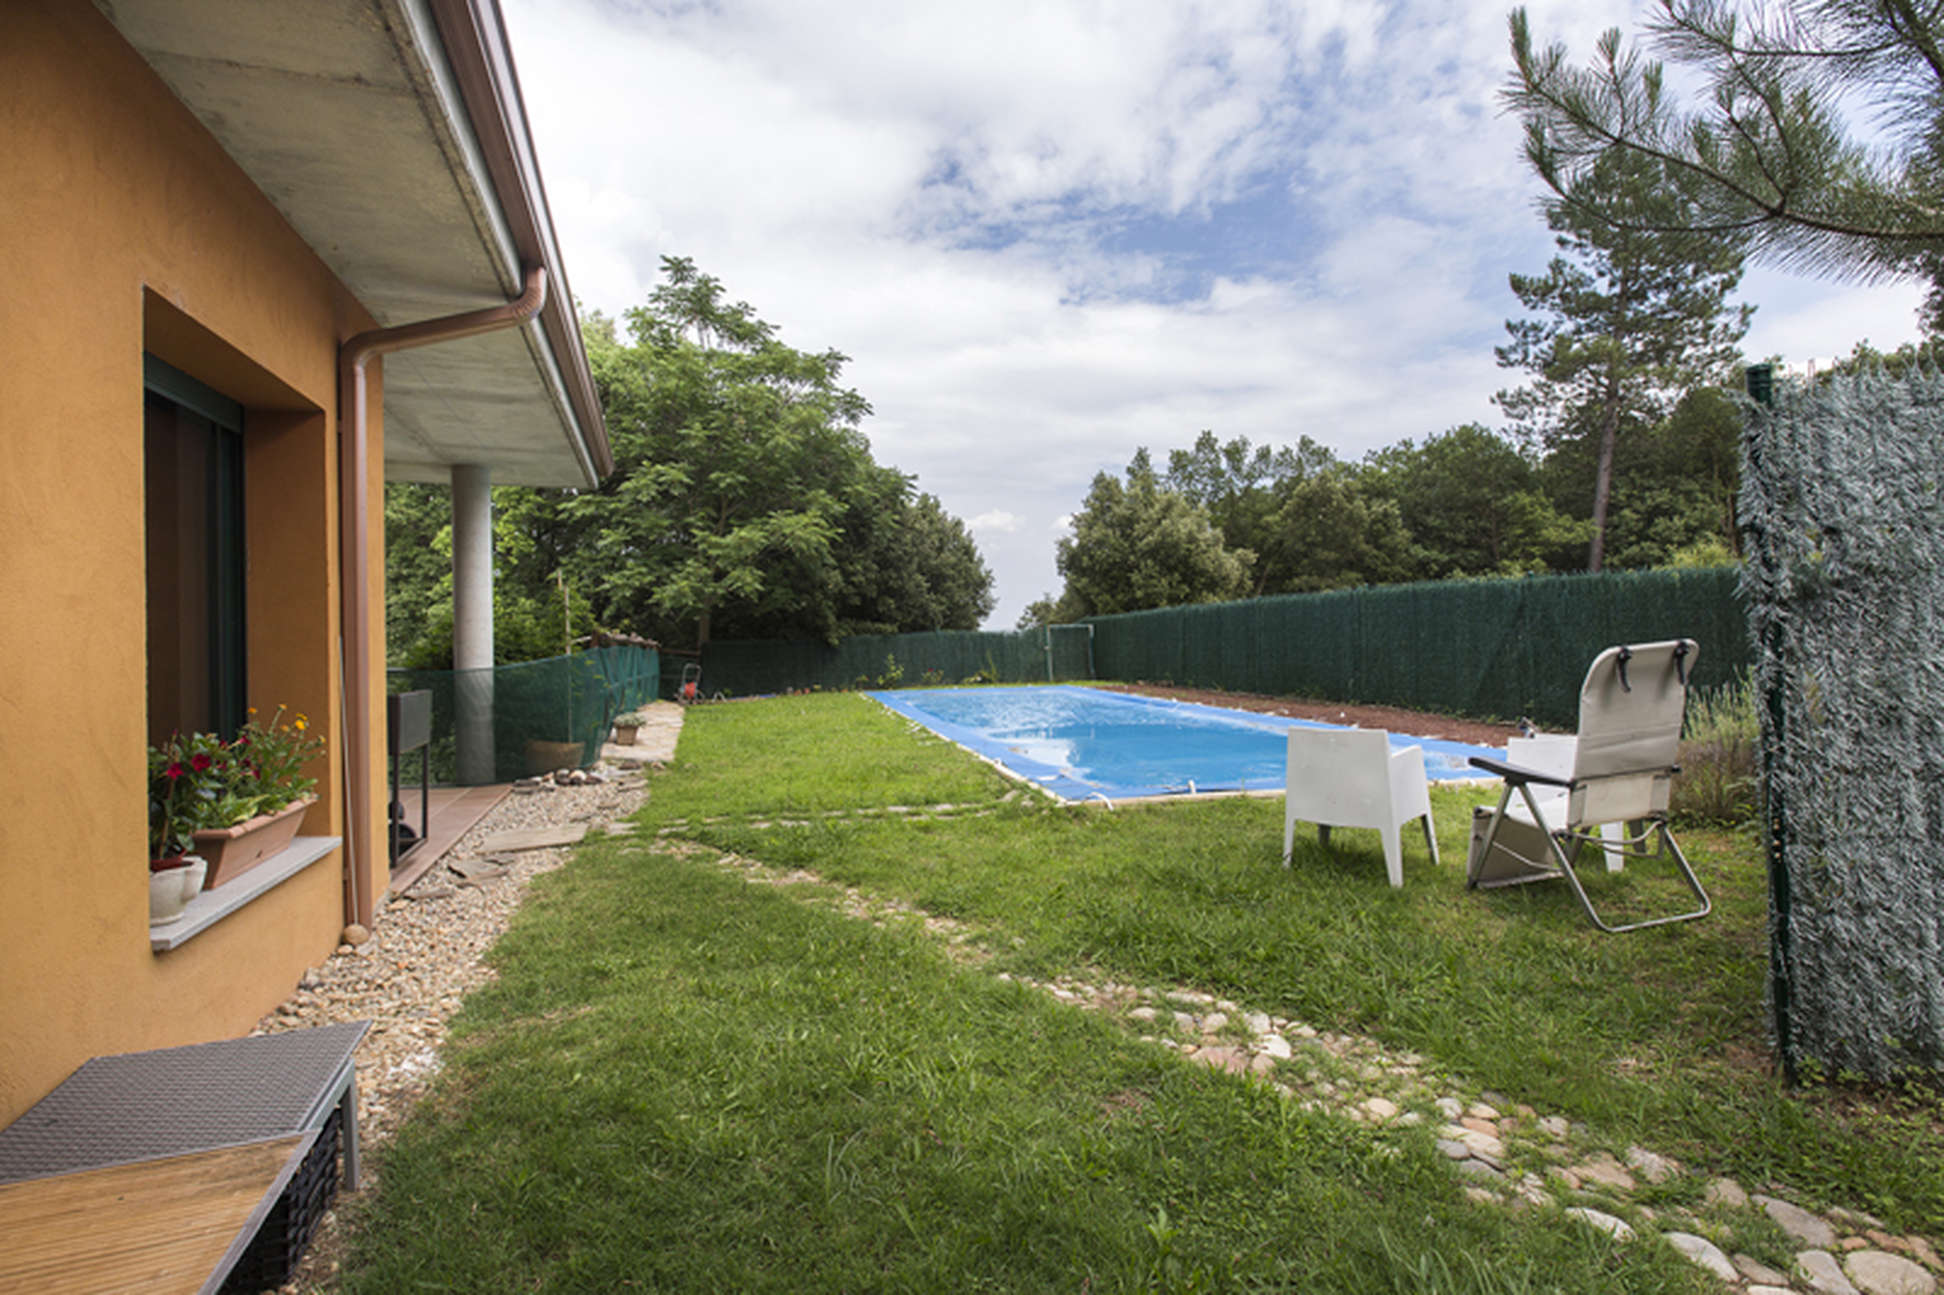 Very nice house for sale close to Banyoles